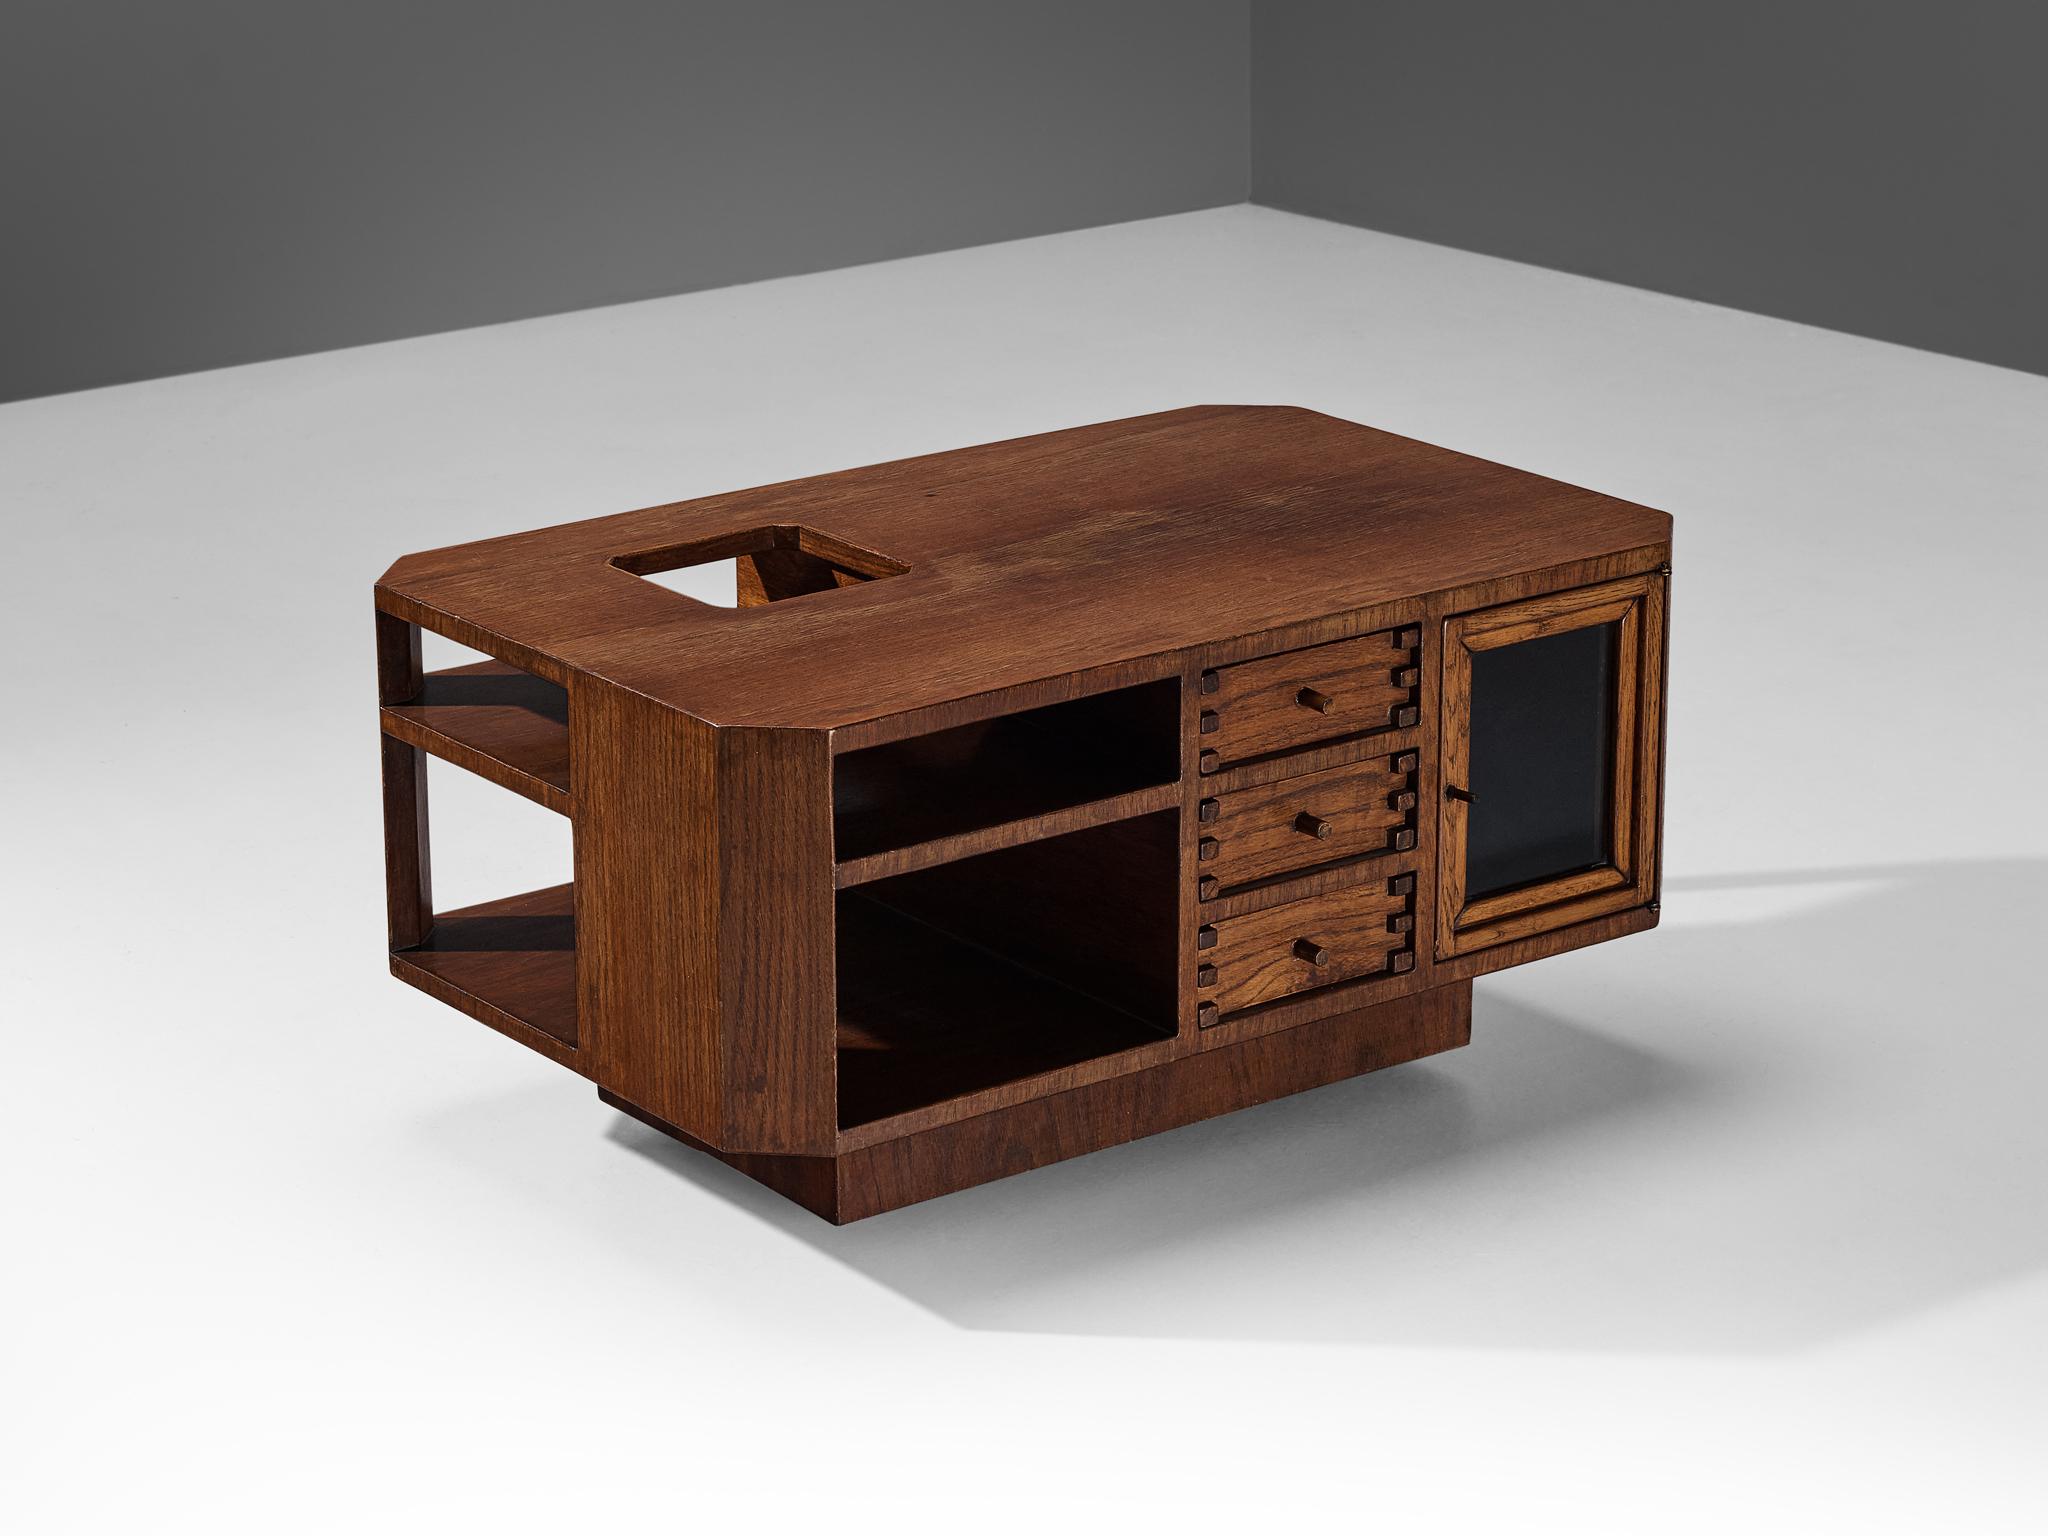 Late 20th Century Giuseppe Rivadossi Coffee Table with Storage Compartments in Oak For Sale